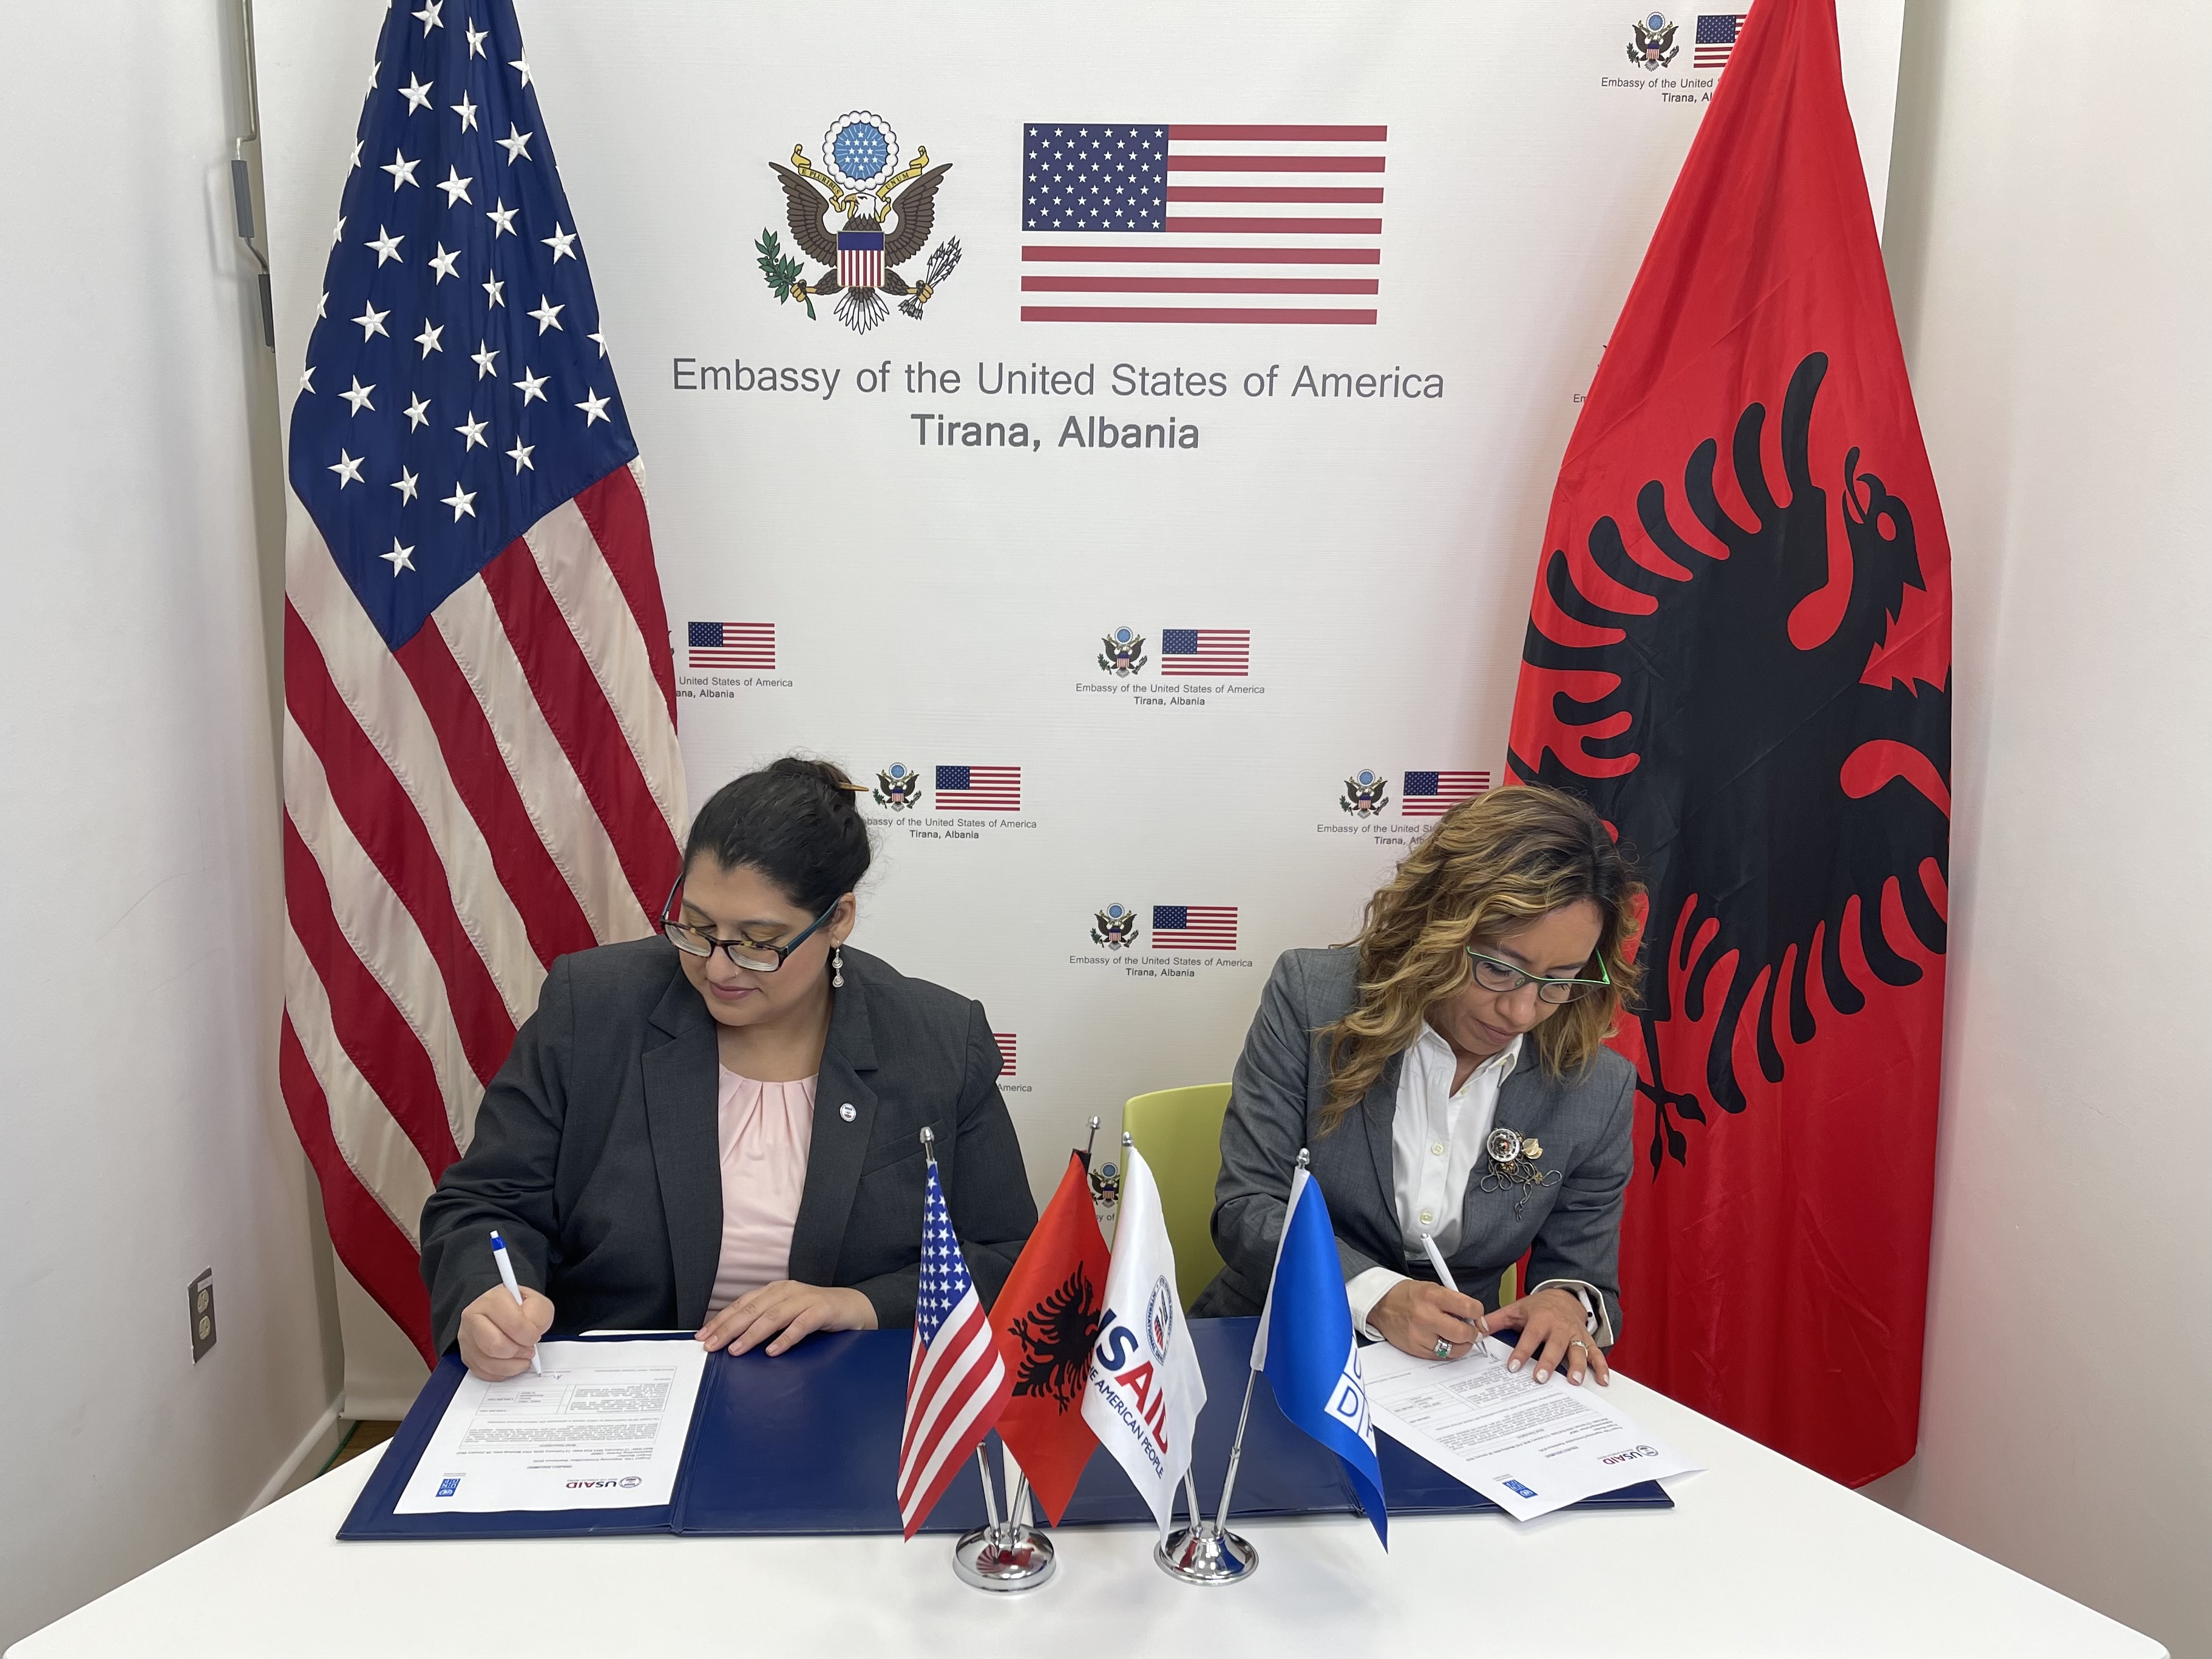 United States Agency for International Development in Albania (USAID/Albania) has partnered with the United Nations Development Programme (UNDP) to strengthen the resilience of marginalized communities through a new project: Improving Community Resilience (ICR).